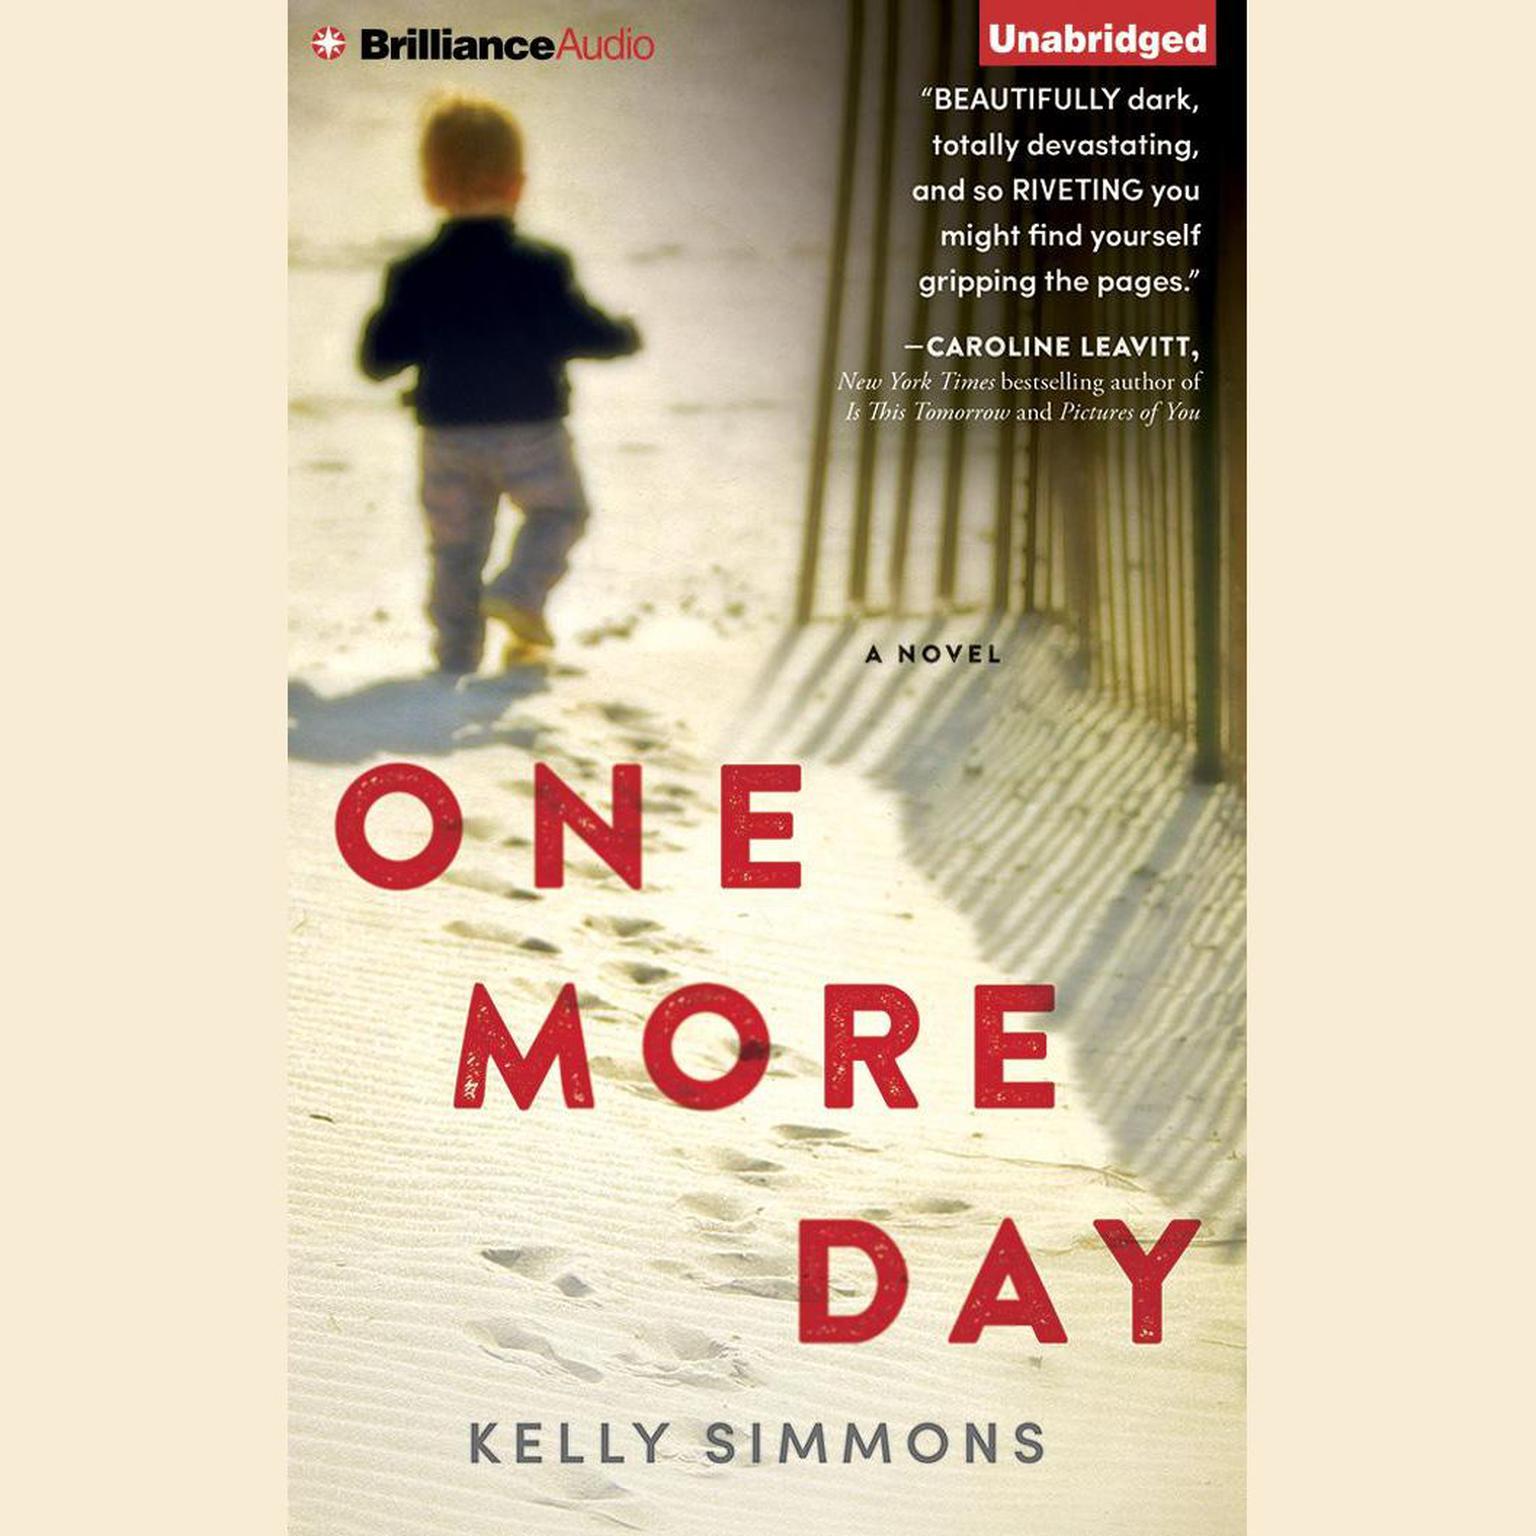 One More Day Audiobook, by Kelly Simmons